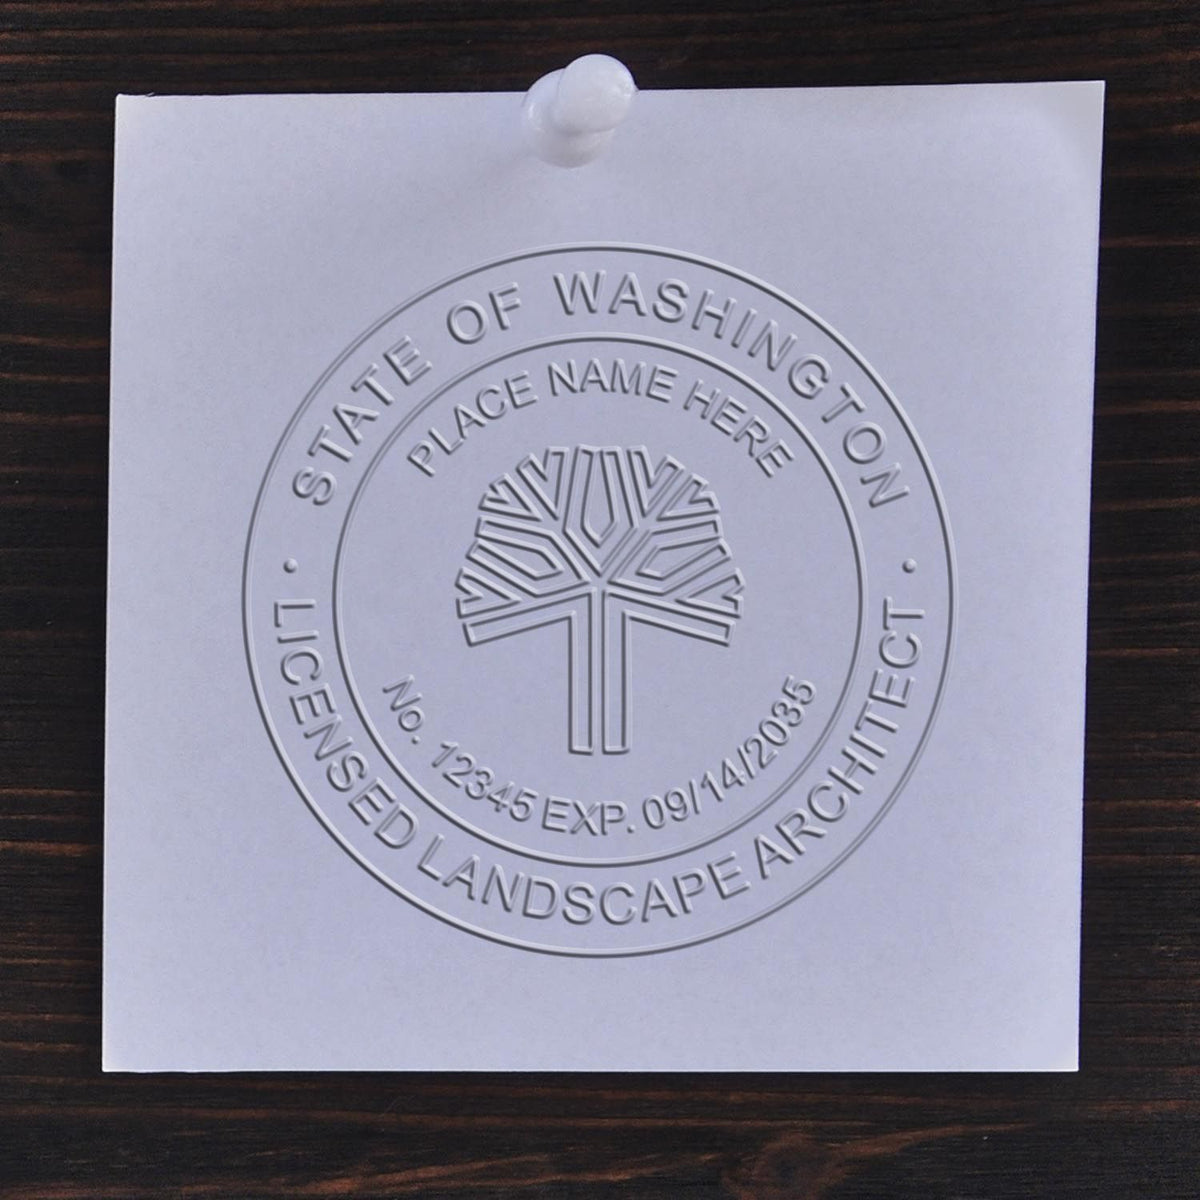 The Gift Washington Landscape Architect Seal stamp impression comes to life with a crisp, detailed image stamped on paper - showcasing true professional quality.